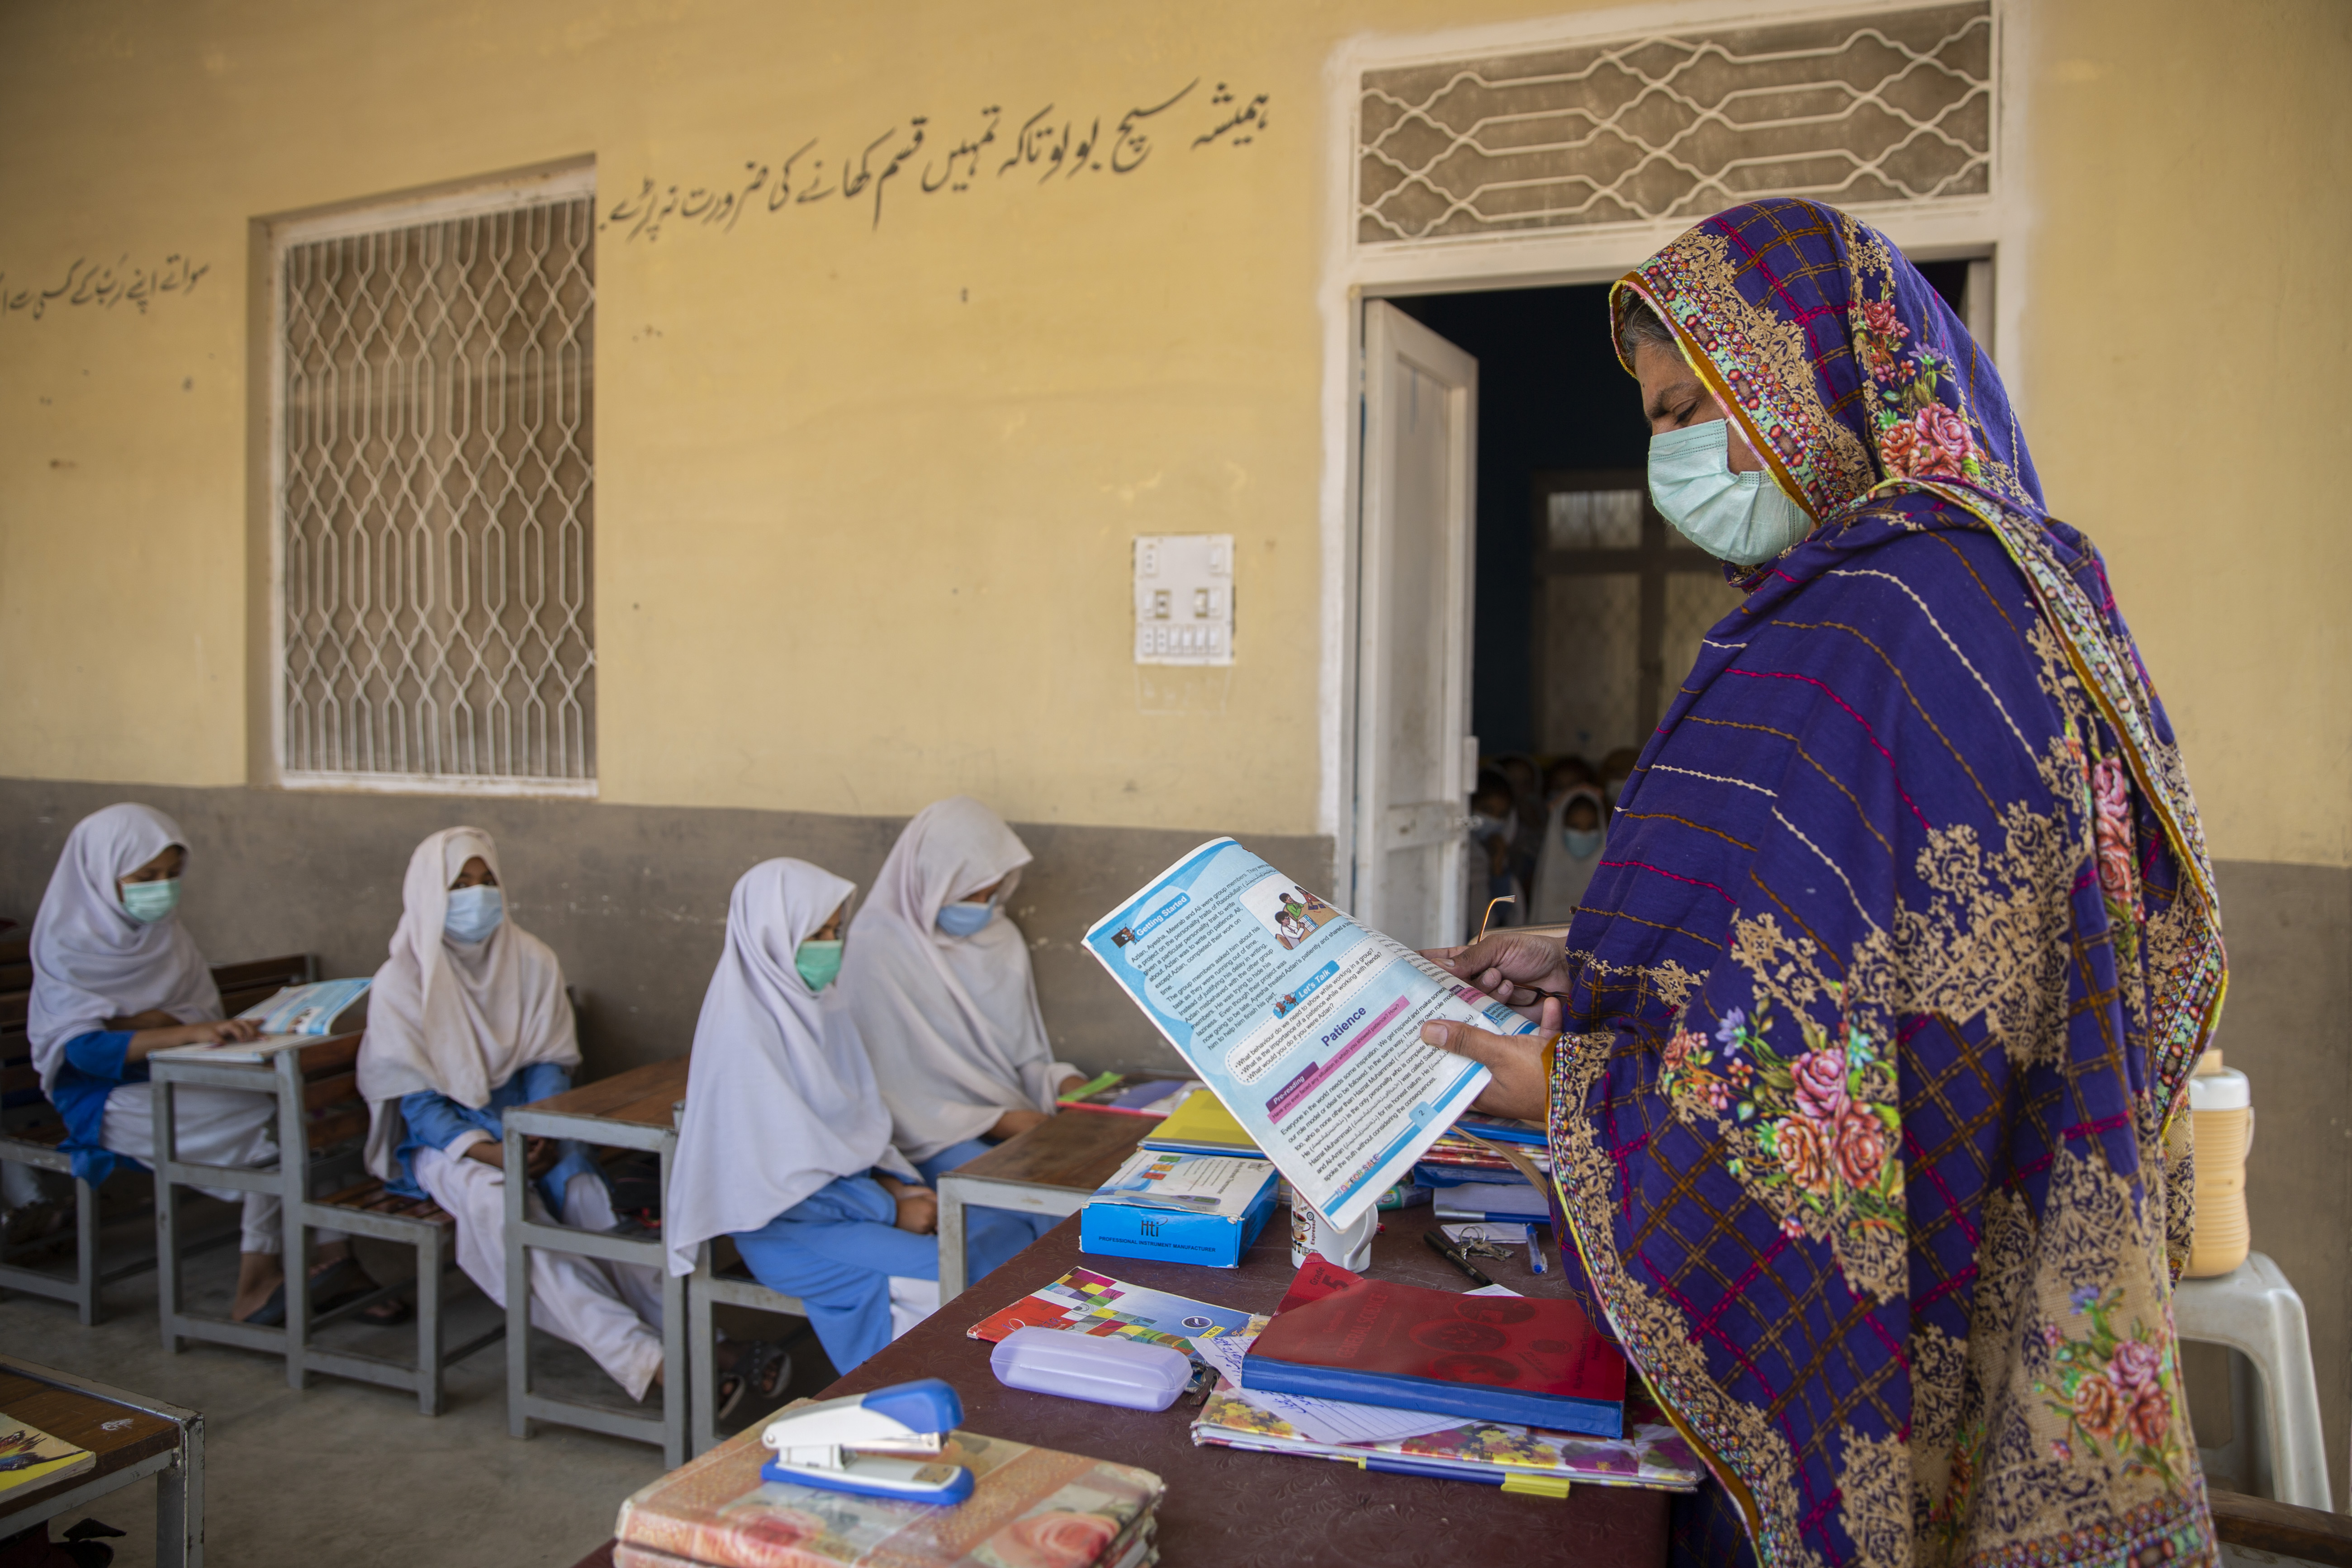 Nafeesa Ali, who is the principal of the school teaches a class of Afghan and Pakistani students at Chichana Primary School for Girls in Chichana, Kohat District, Pakistan